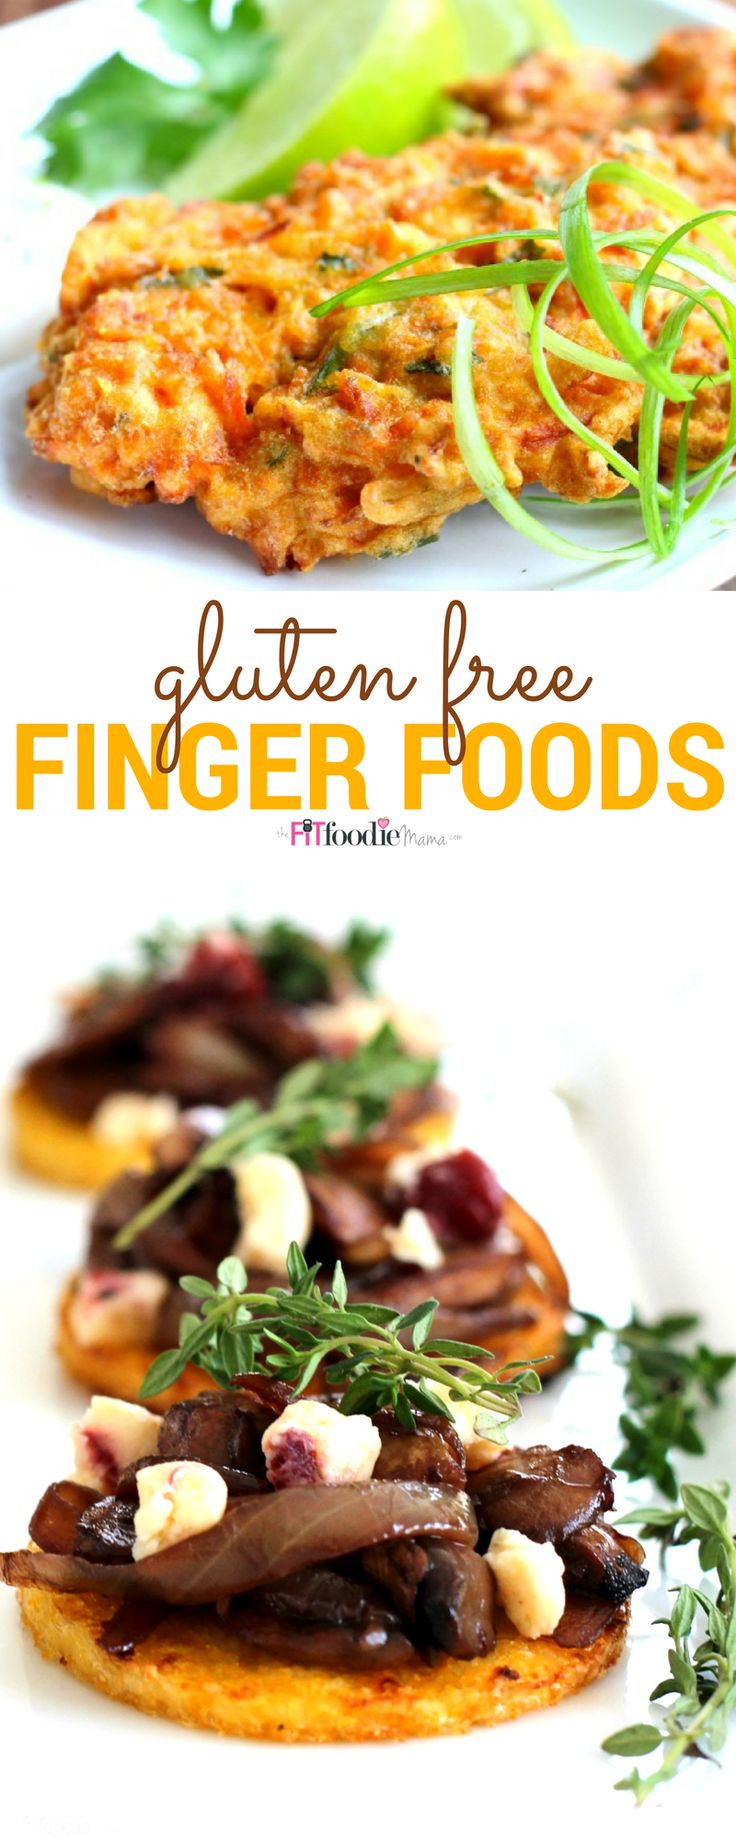 Gluten Free Appetizer Recipes
 Gluten Free Finger Foods for the Holidays